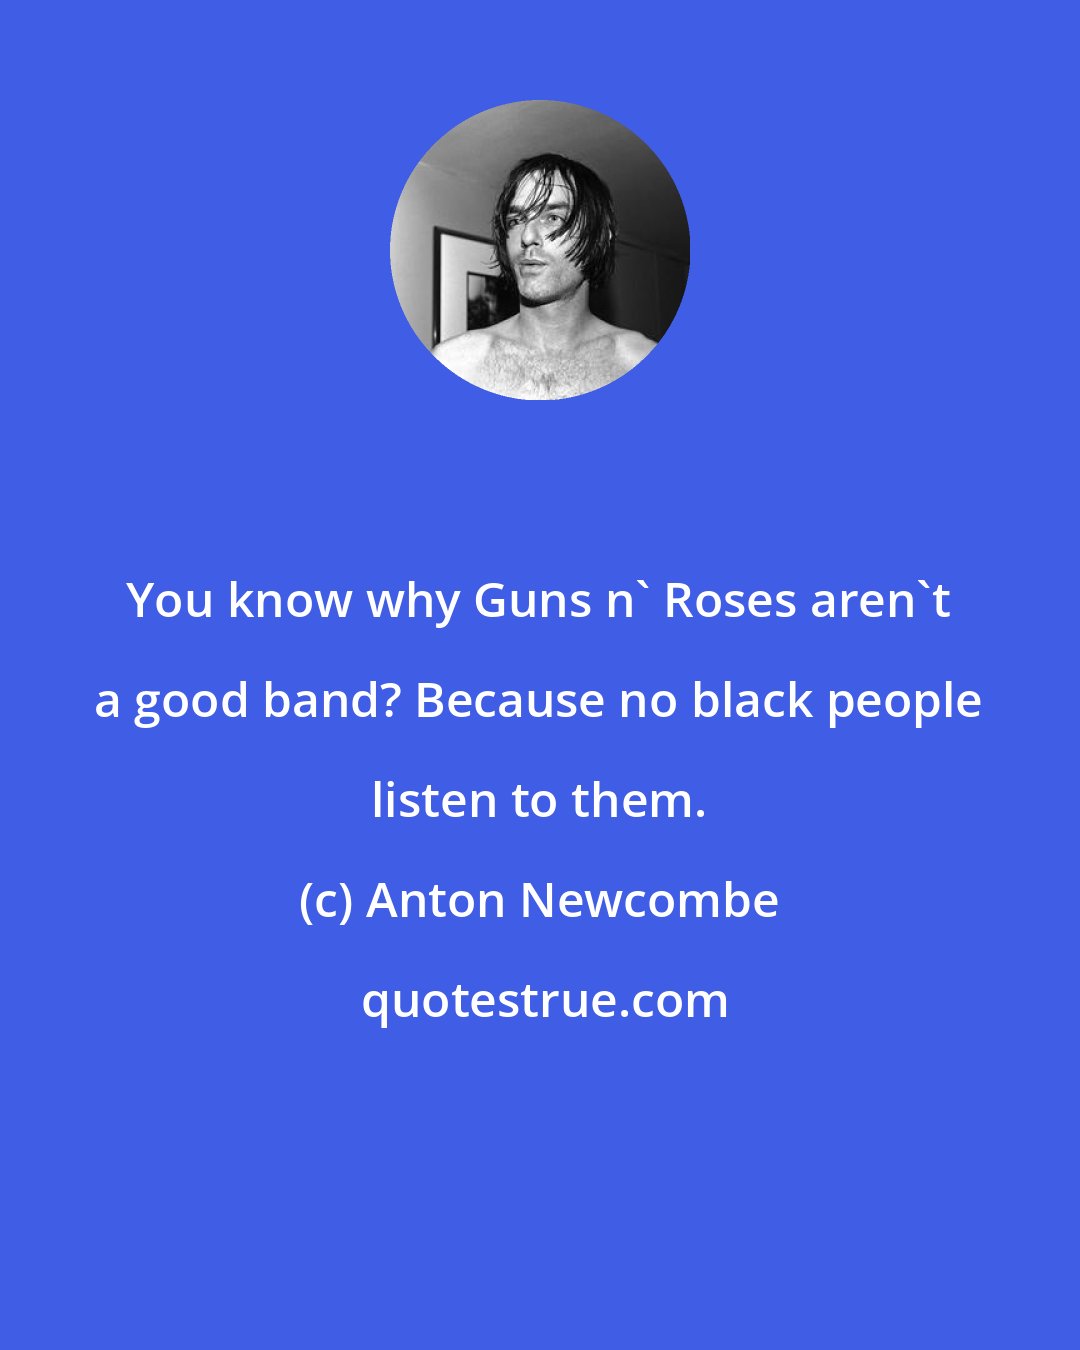 Anton Newcombe: You know why Guns n' Roses aren't a good band? Because no black people listen to them.